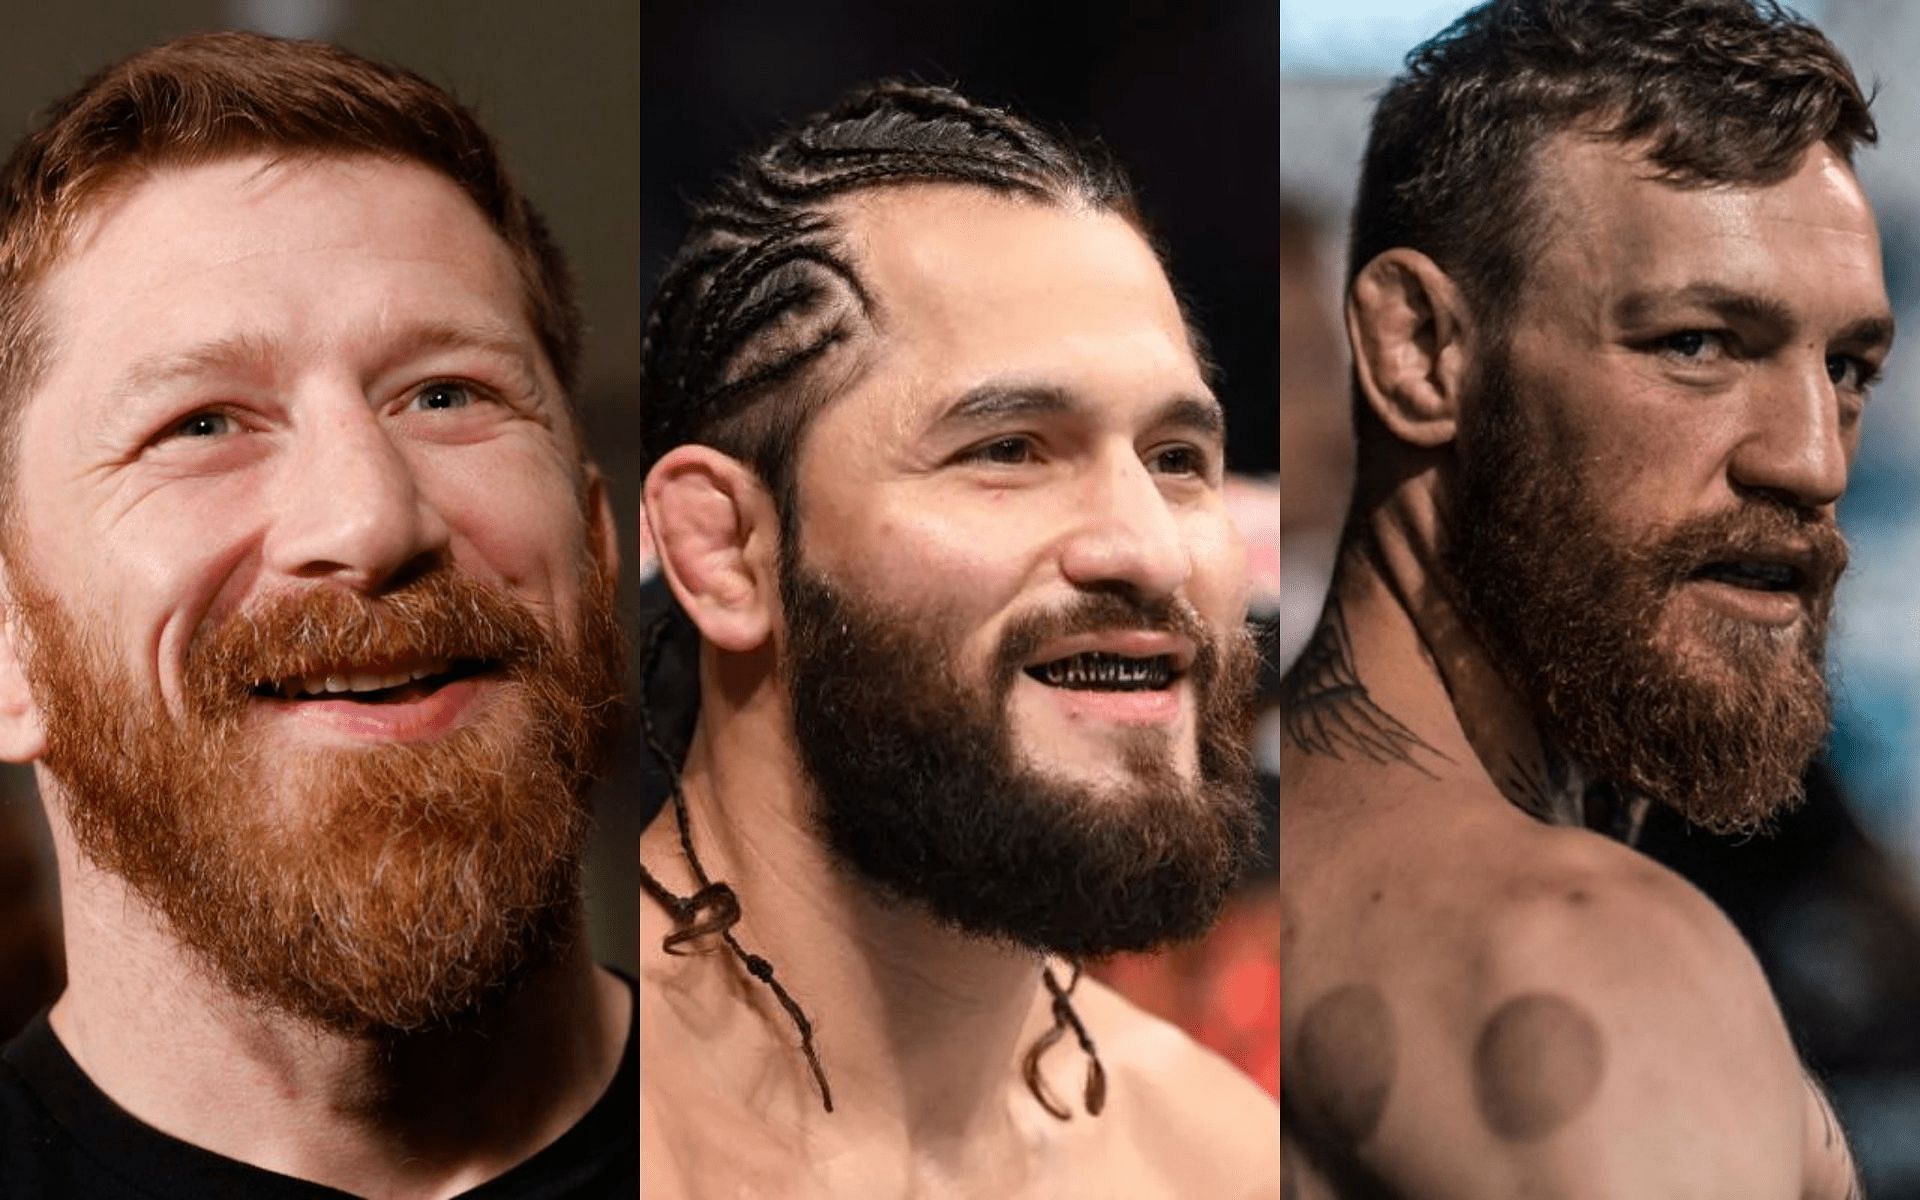 Mike Brown (left), Jorge Masvidal (center), and Conor McGregor (right)